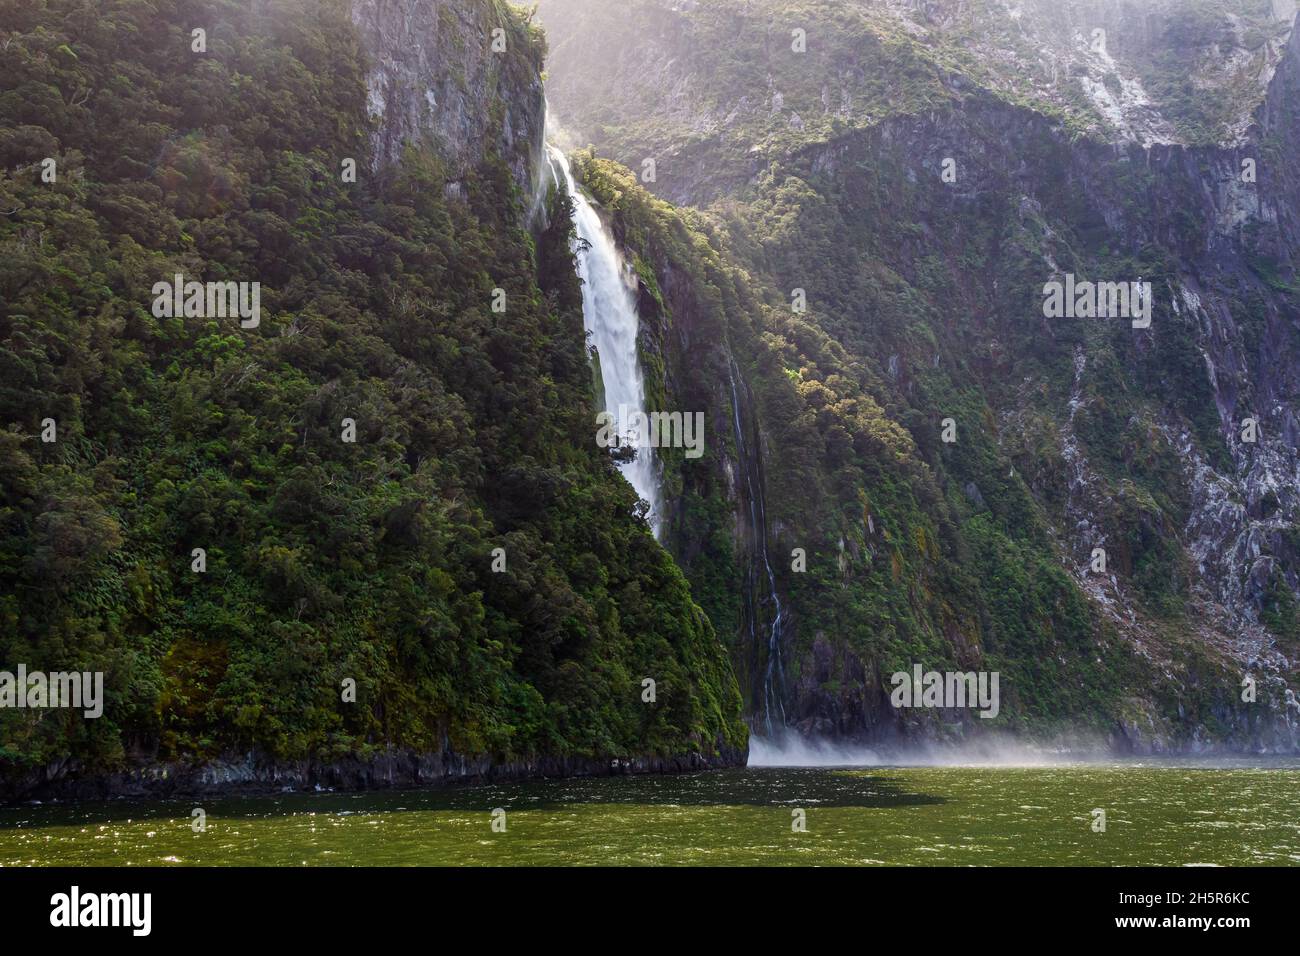 Landscape with a small waterfall and a mountain overgrown with greenery. Fiordland National Park. South Island, New Zealand Stock Photo